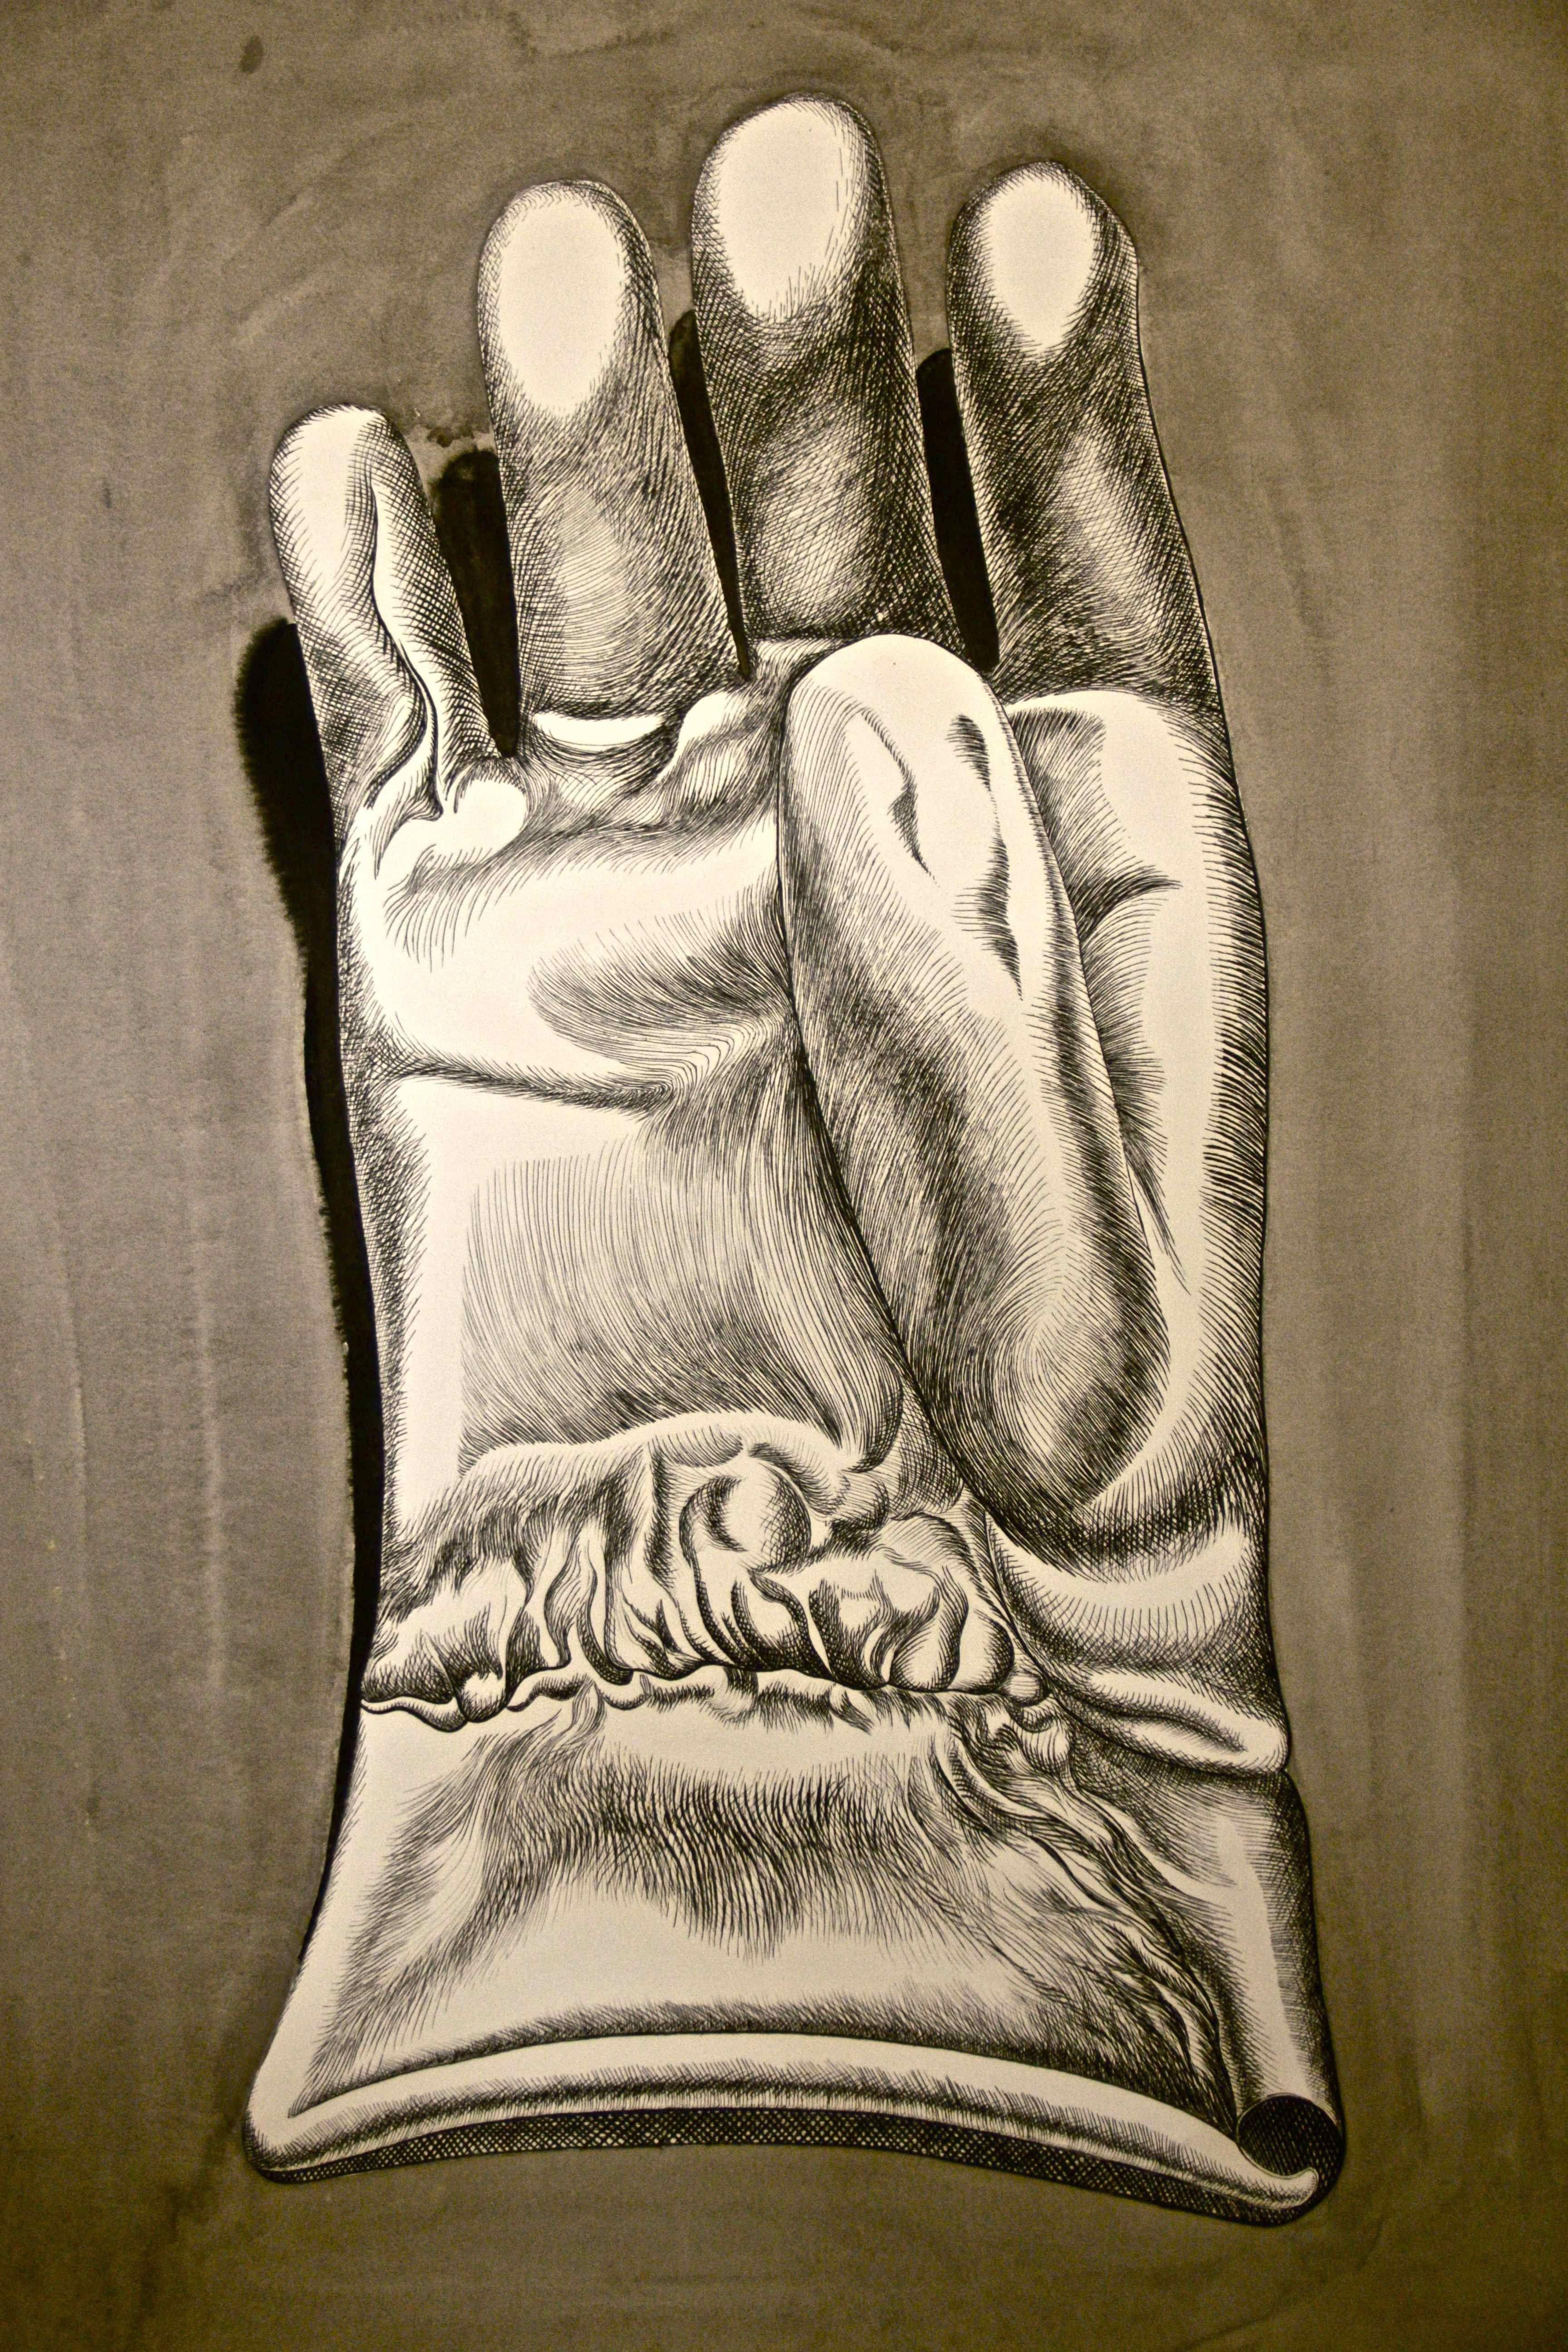 Glove is a beautiful color etching on paper, realized in 1972 by the Italian artist Giacomo Porzano (1925-2006). Unique color variation.

Hand-signed and dated by Giacomo Porzano in pencil. With the unmistakable master's touch, this contemporary